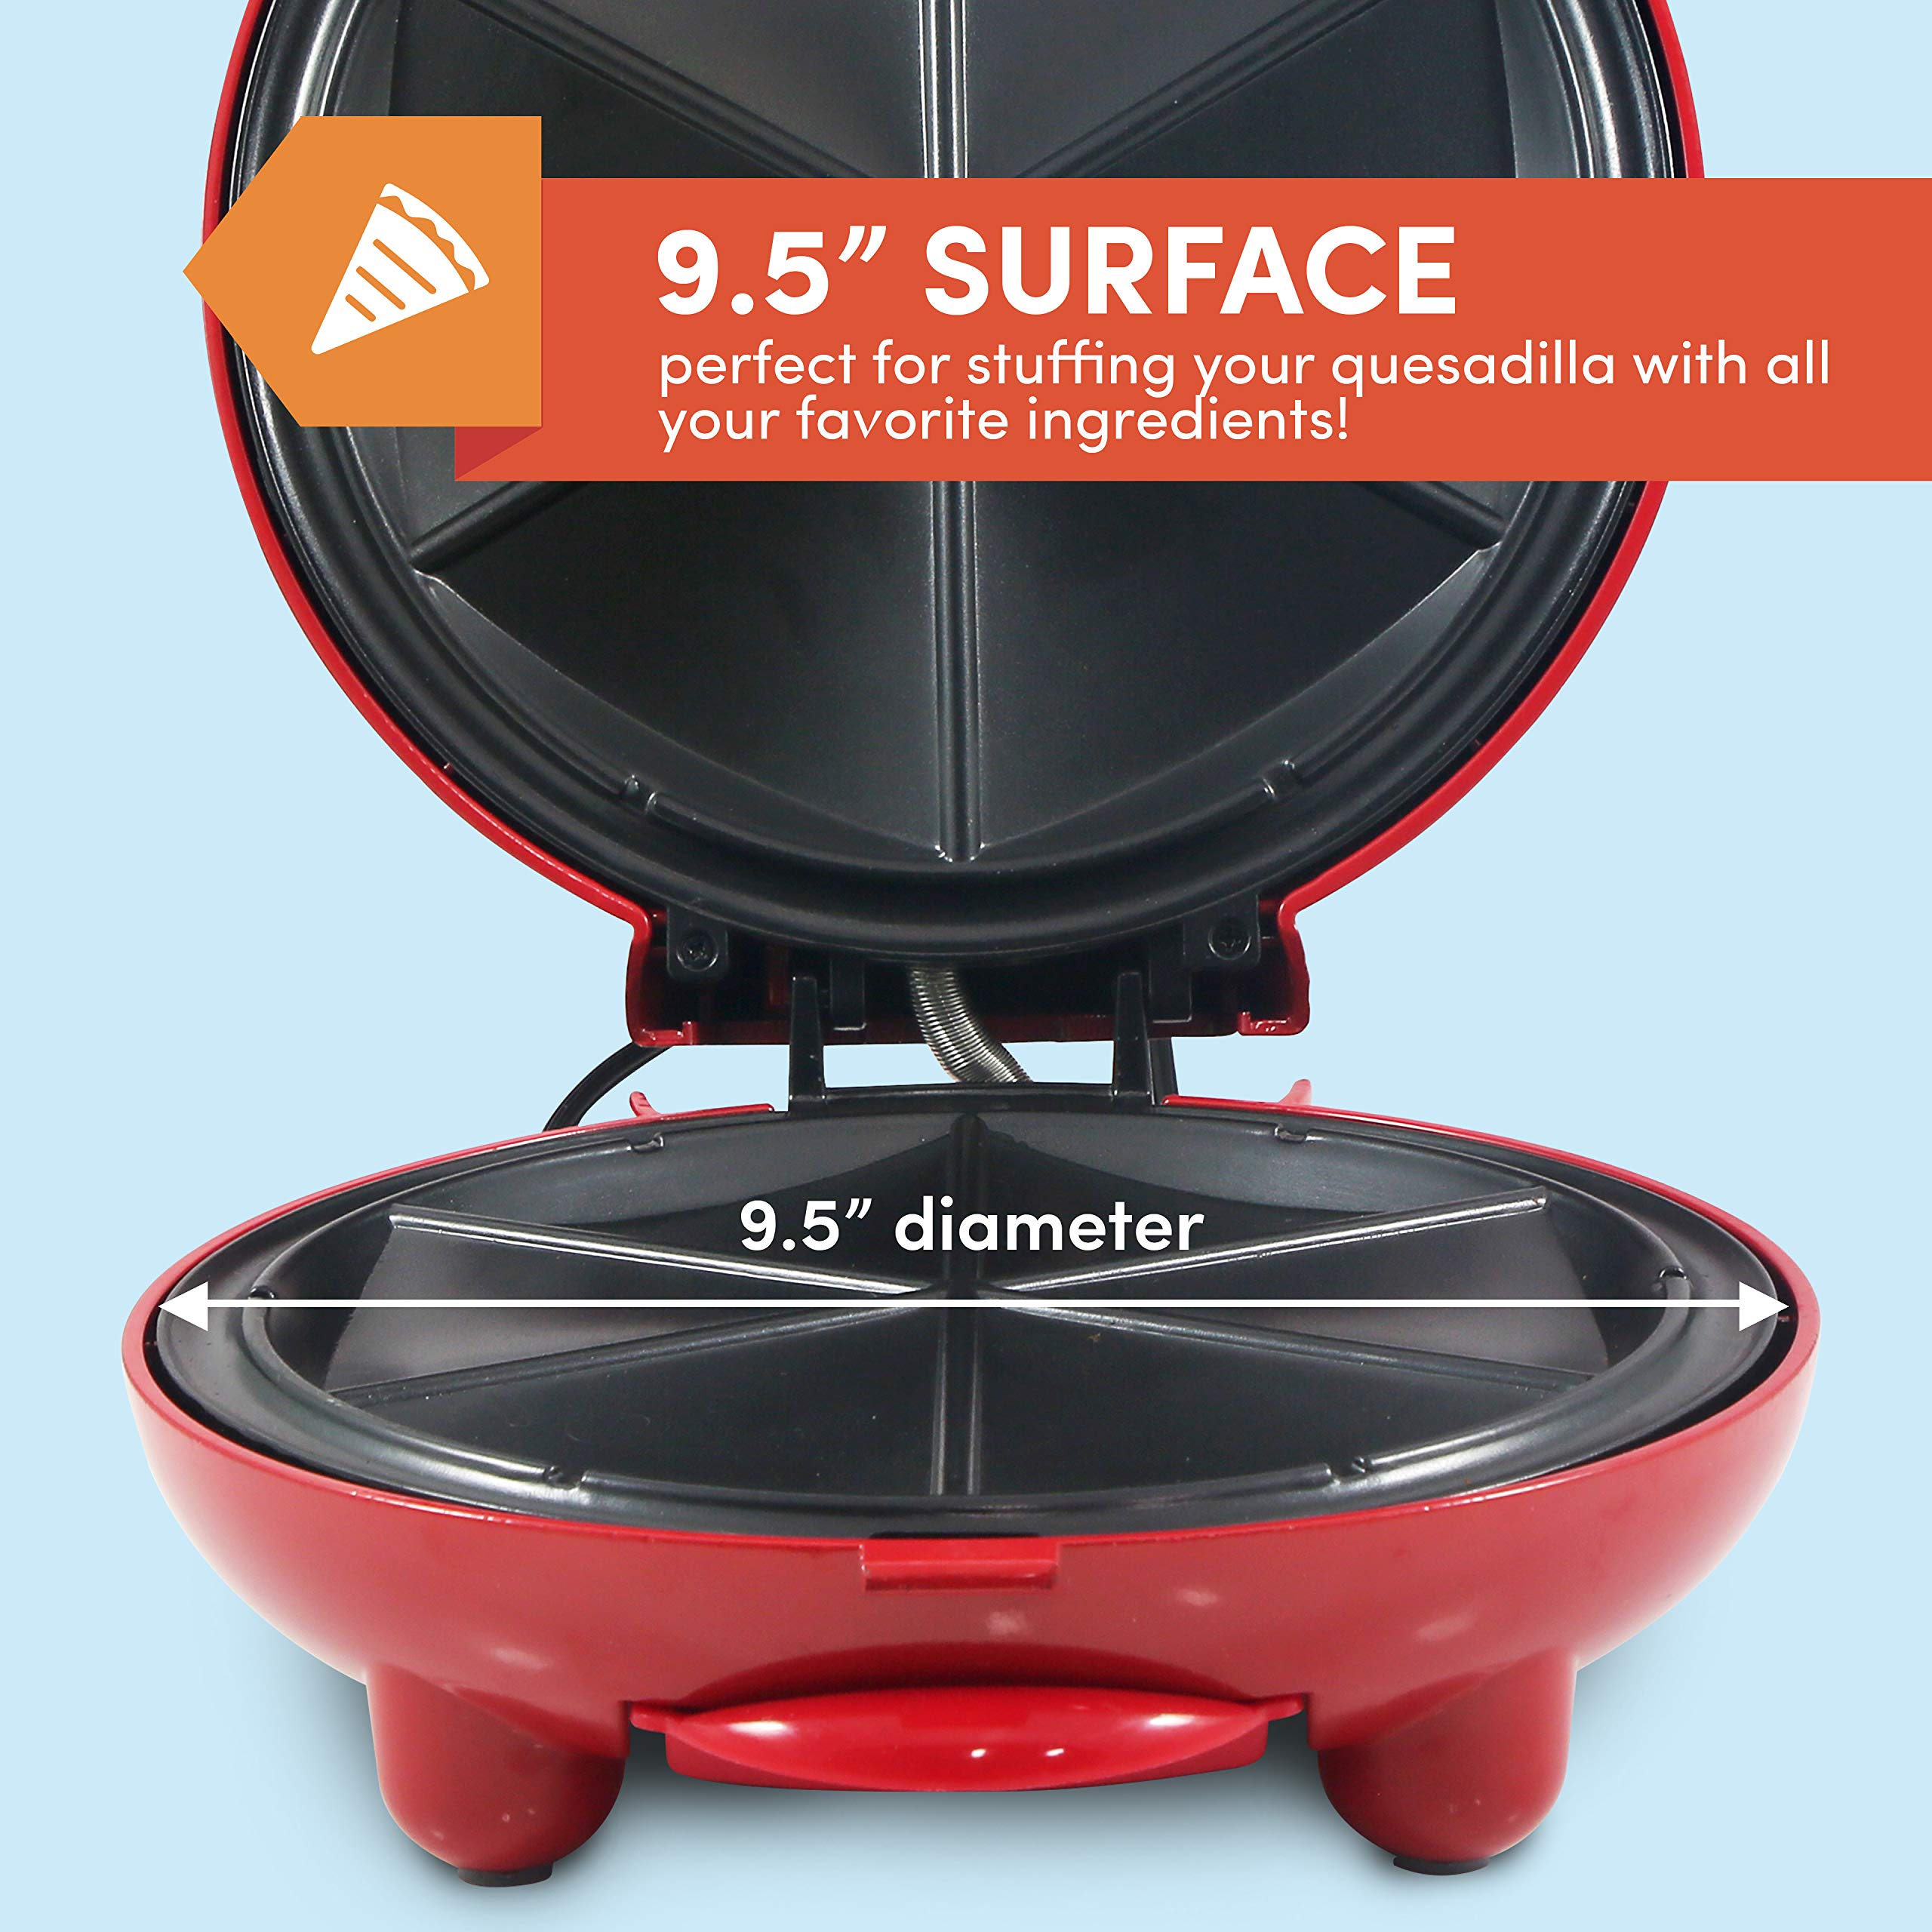 Elite Gourmet EQD413 Non-Stick Electric, Mexican Taco Tuesday Quesadilla Maker, Easy-Slice 6-Wedge, Grilled Cheese, 8 Inch, Red